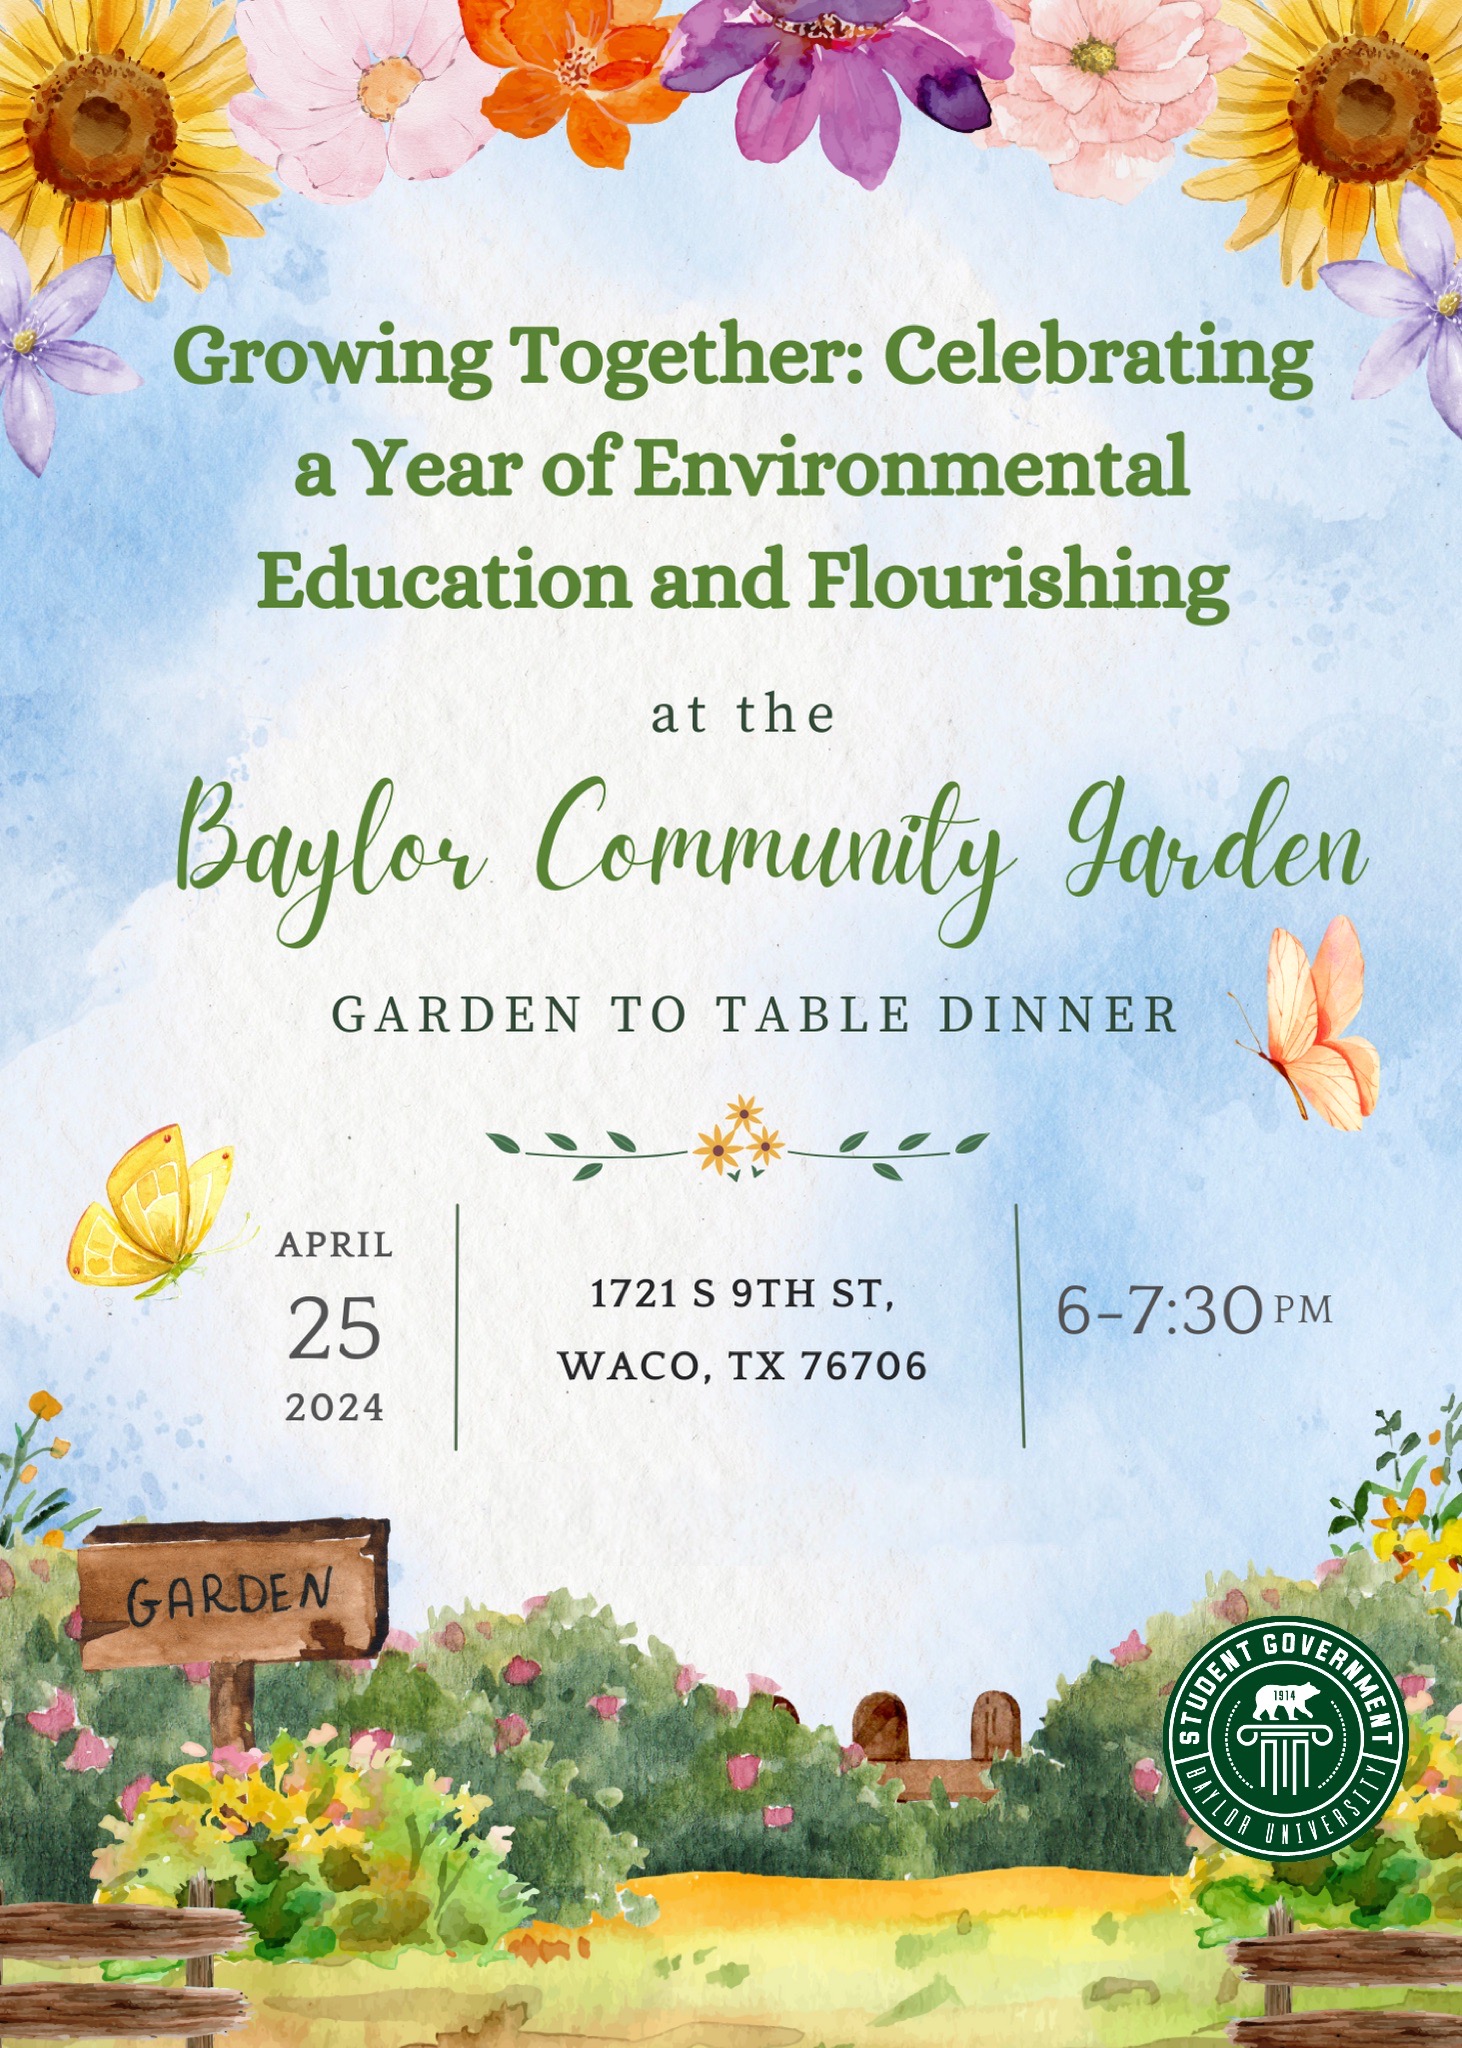 Growing Together: Celebrating a Year of Environmental Education and Flourishing at the Baylor Community Garden, April 25